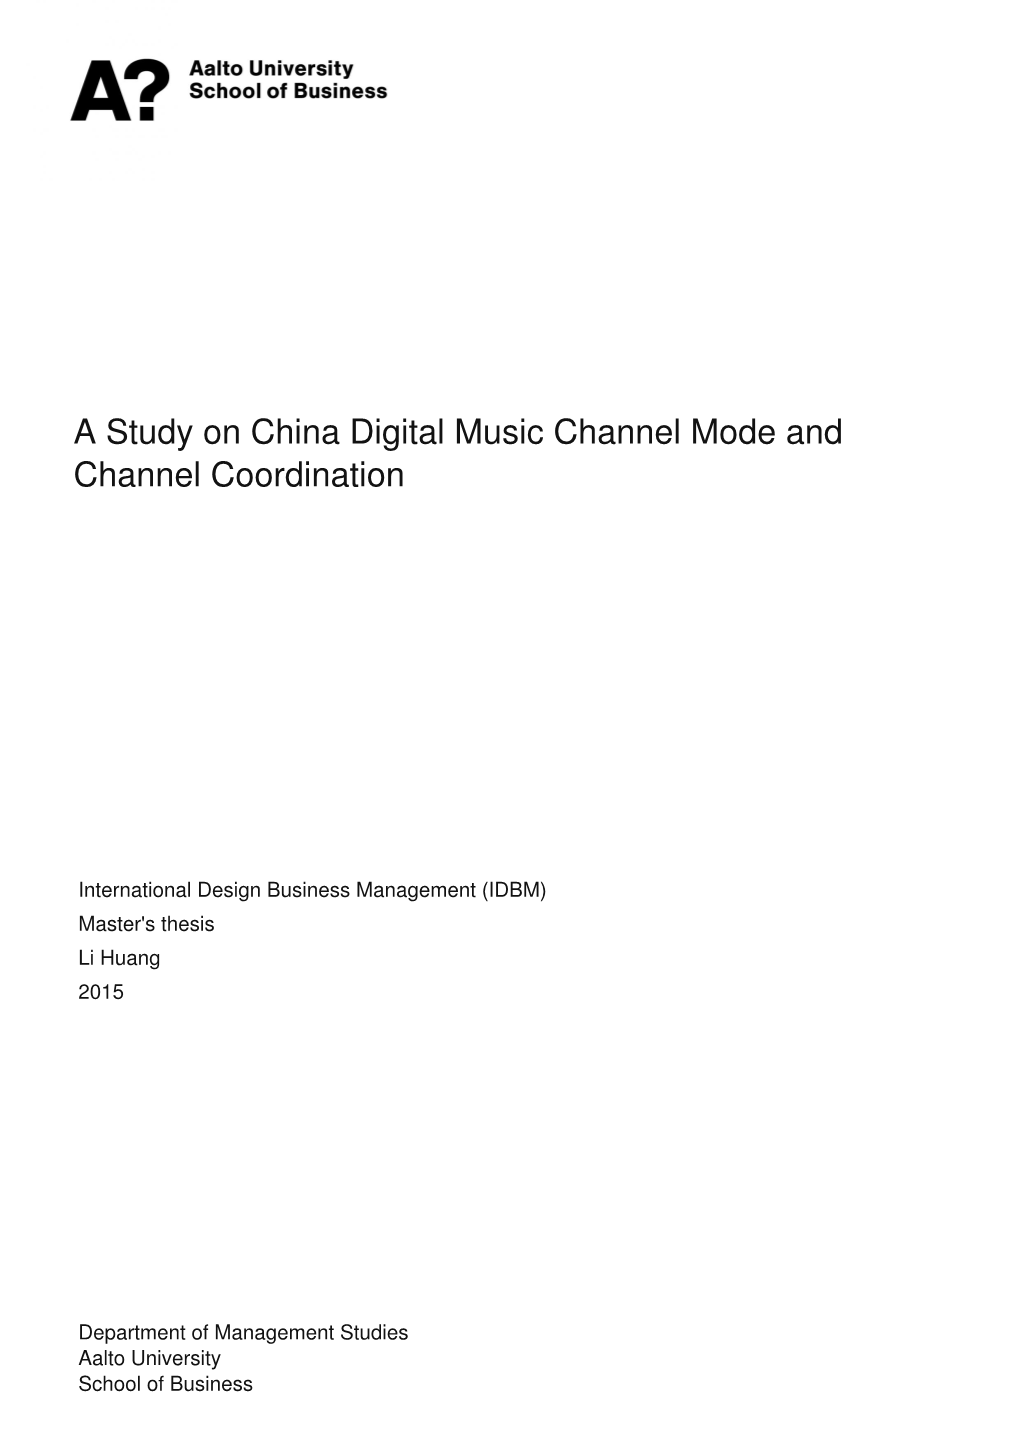 A Study on China Digital Music Channel Mode and Channel Coordination